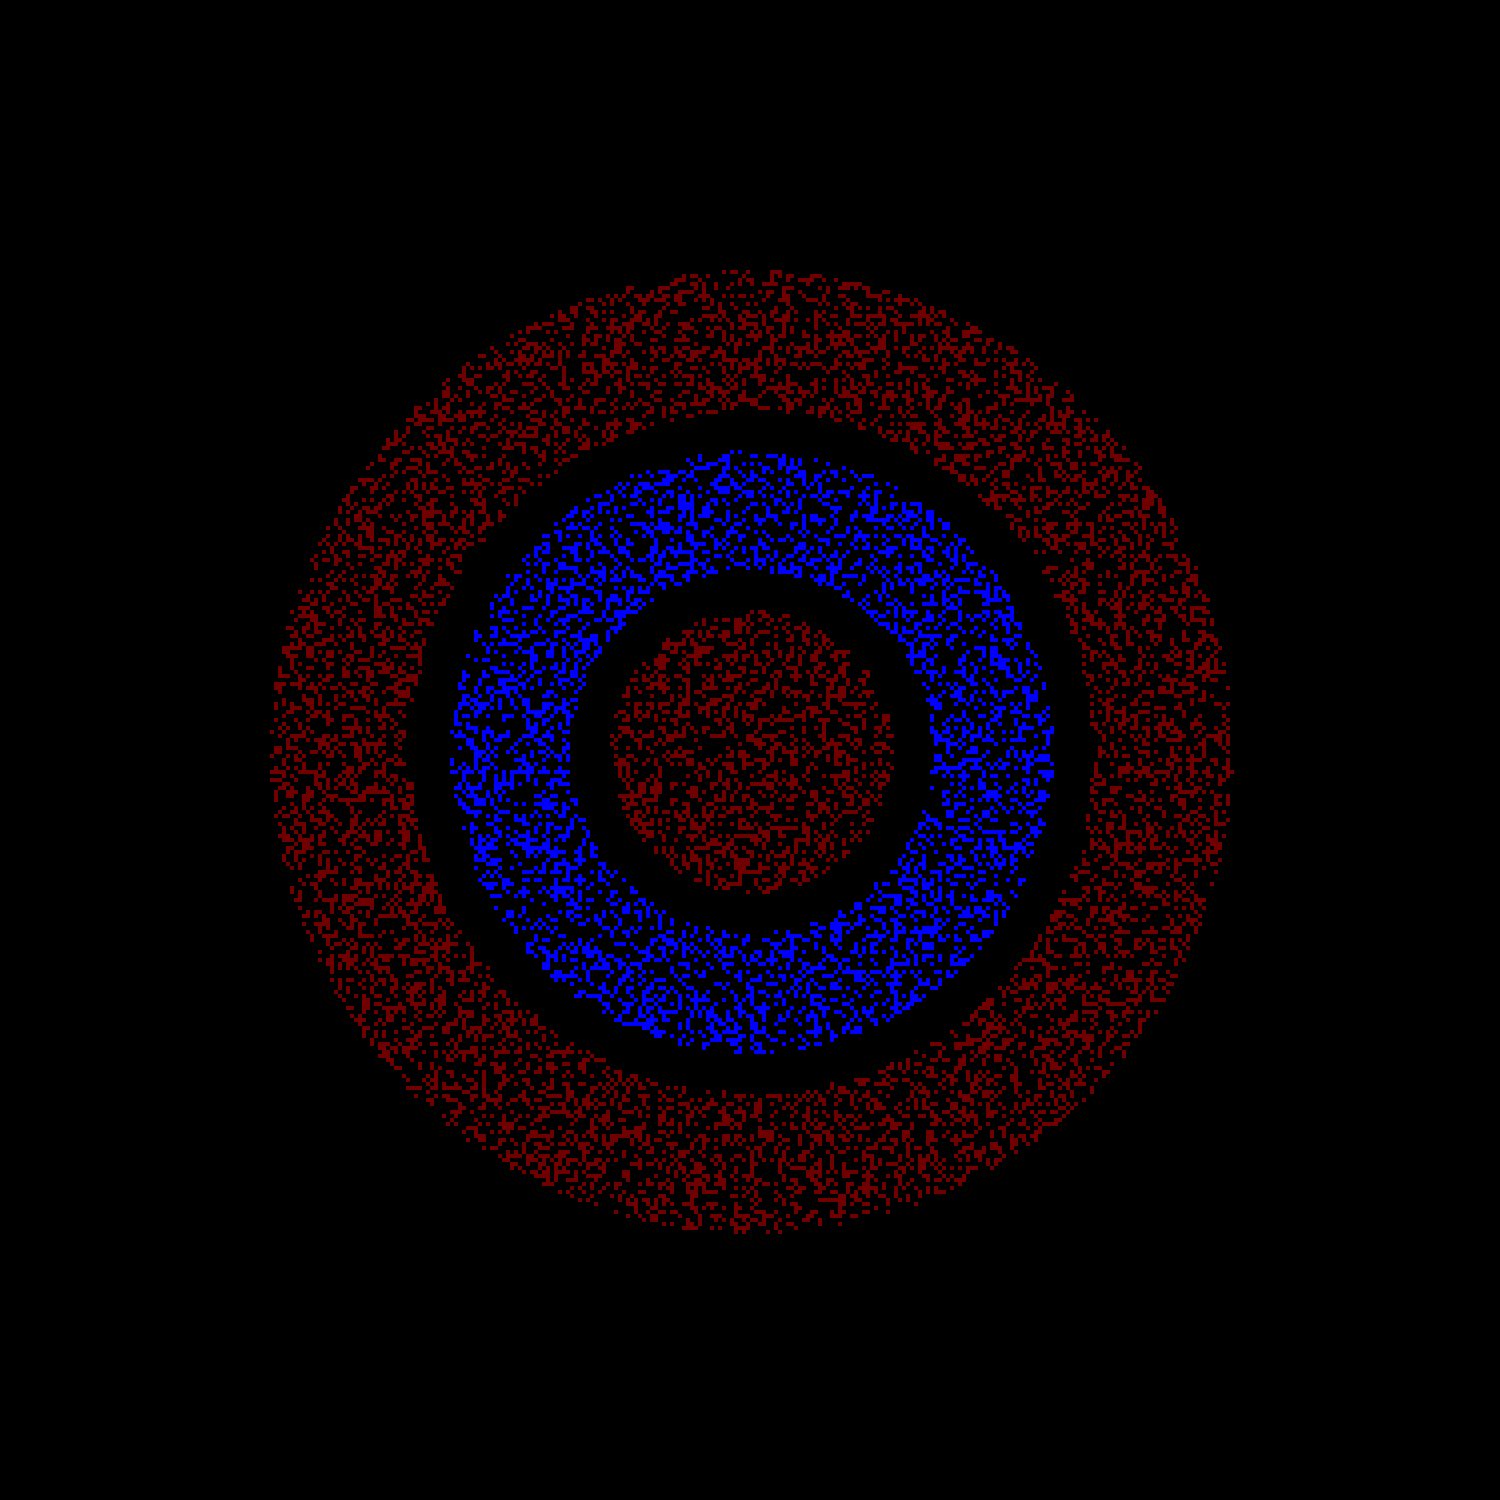 Which circle stands out more in this optical illusion, red or blue?